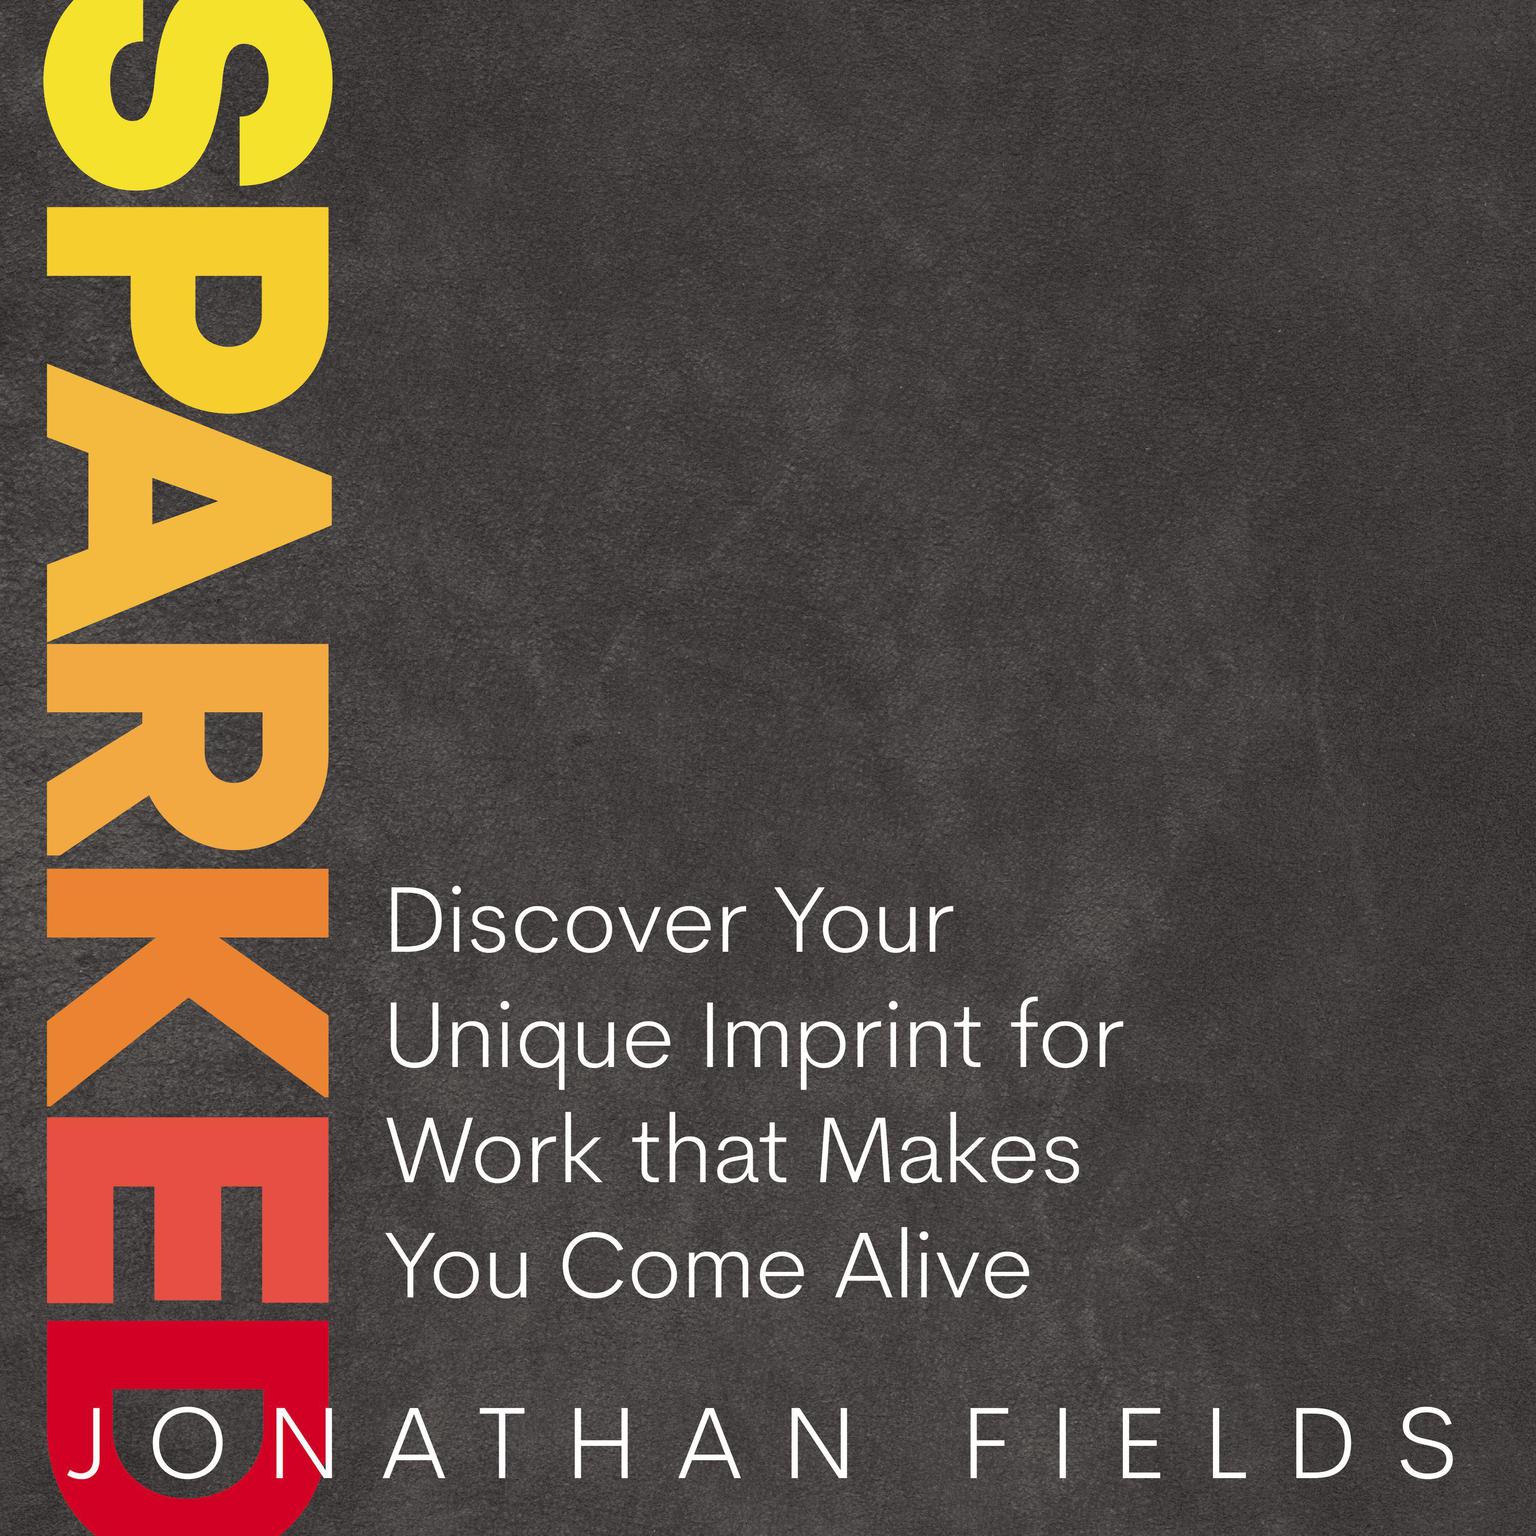 Sparked: Discover Your Unique Imprint for Work that Makes You Come Alive Audiobook, by Jonathan Fields